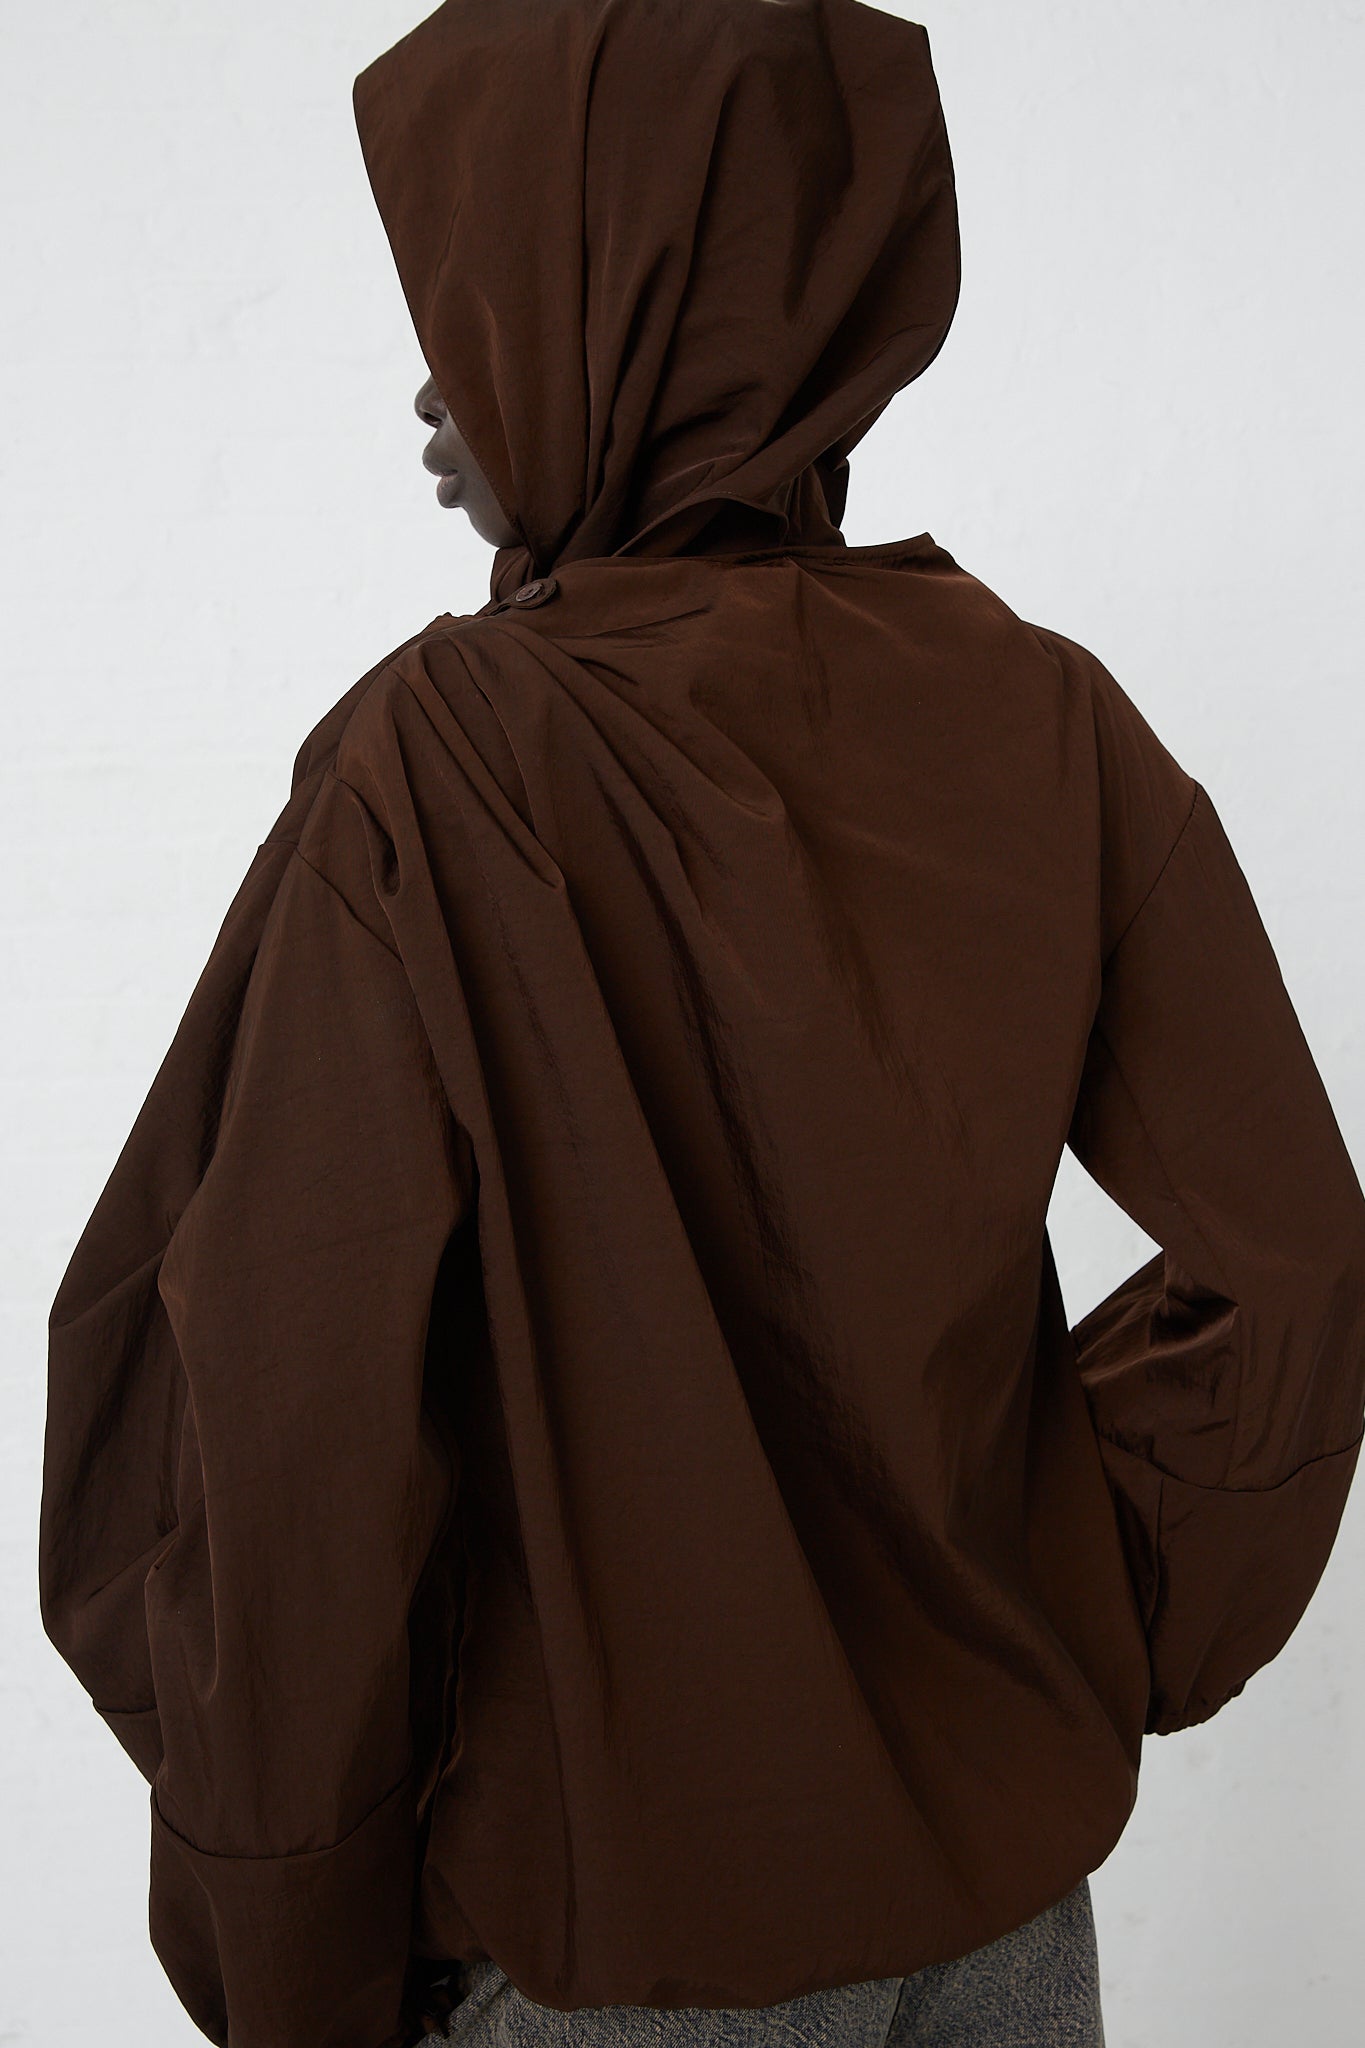 A woman wearing a Zipped on Sleeve Rain Blouse in Choco by Veronique Leroy made of waterproof taffeta nylon fabric.